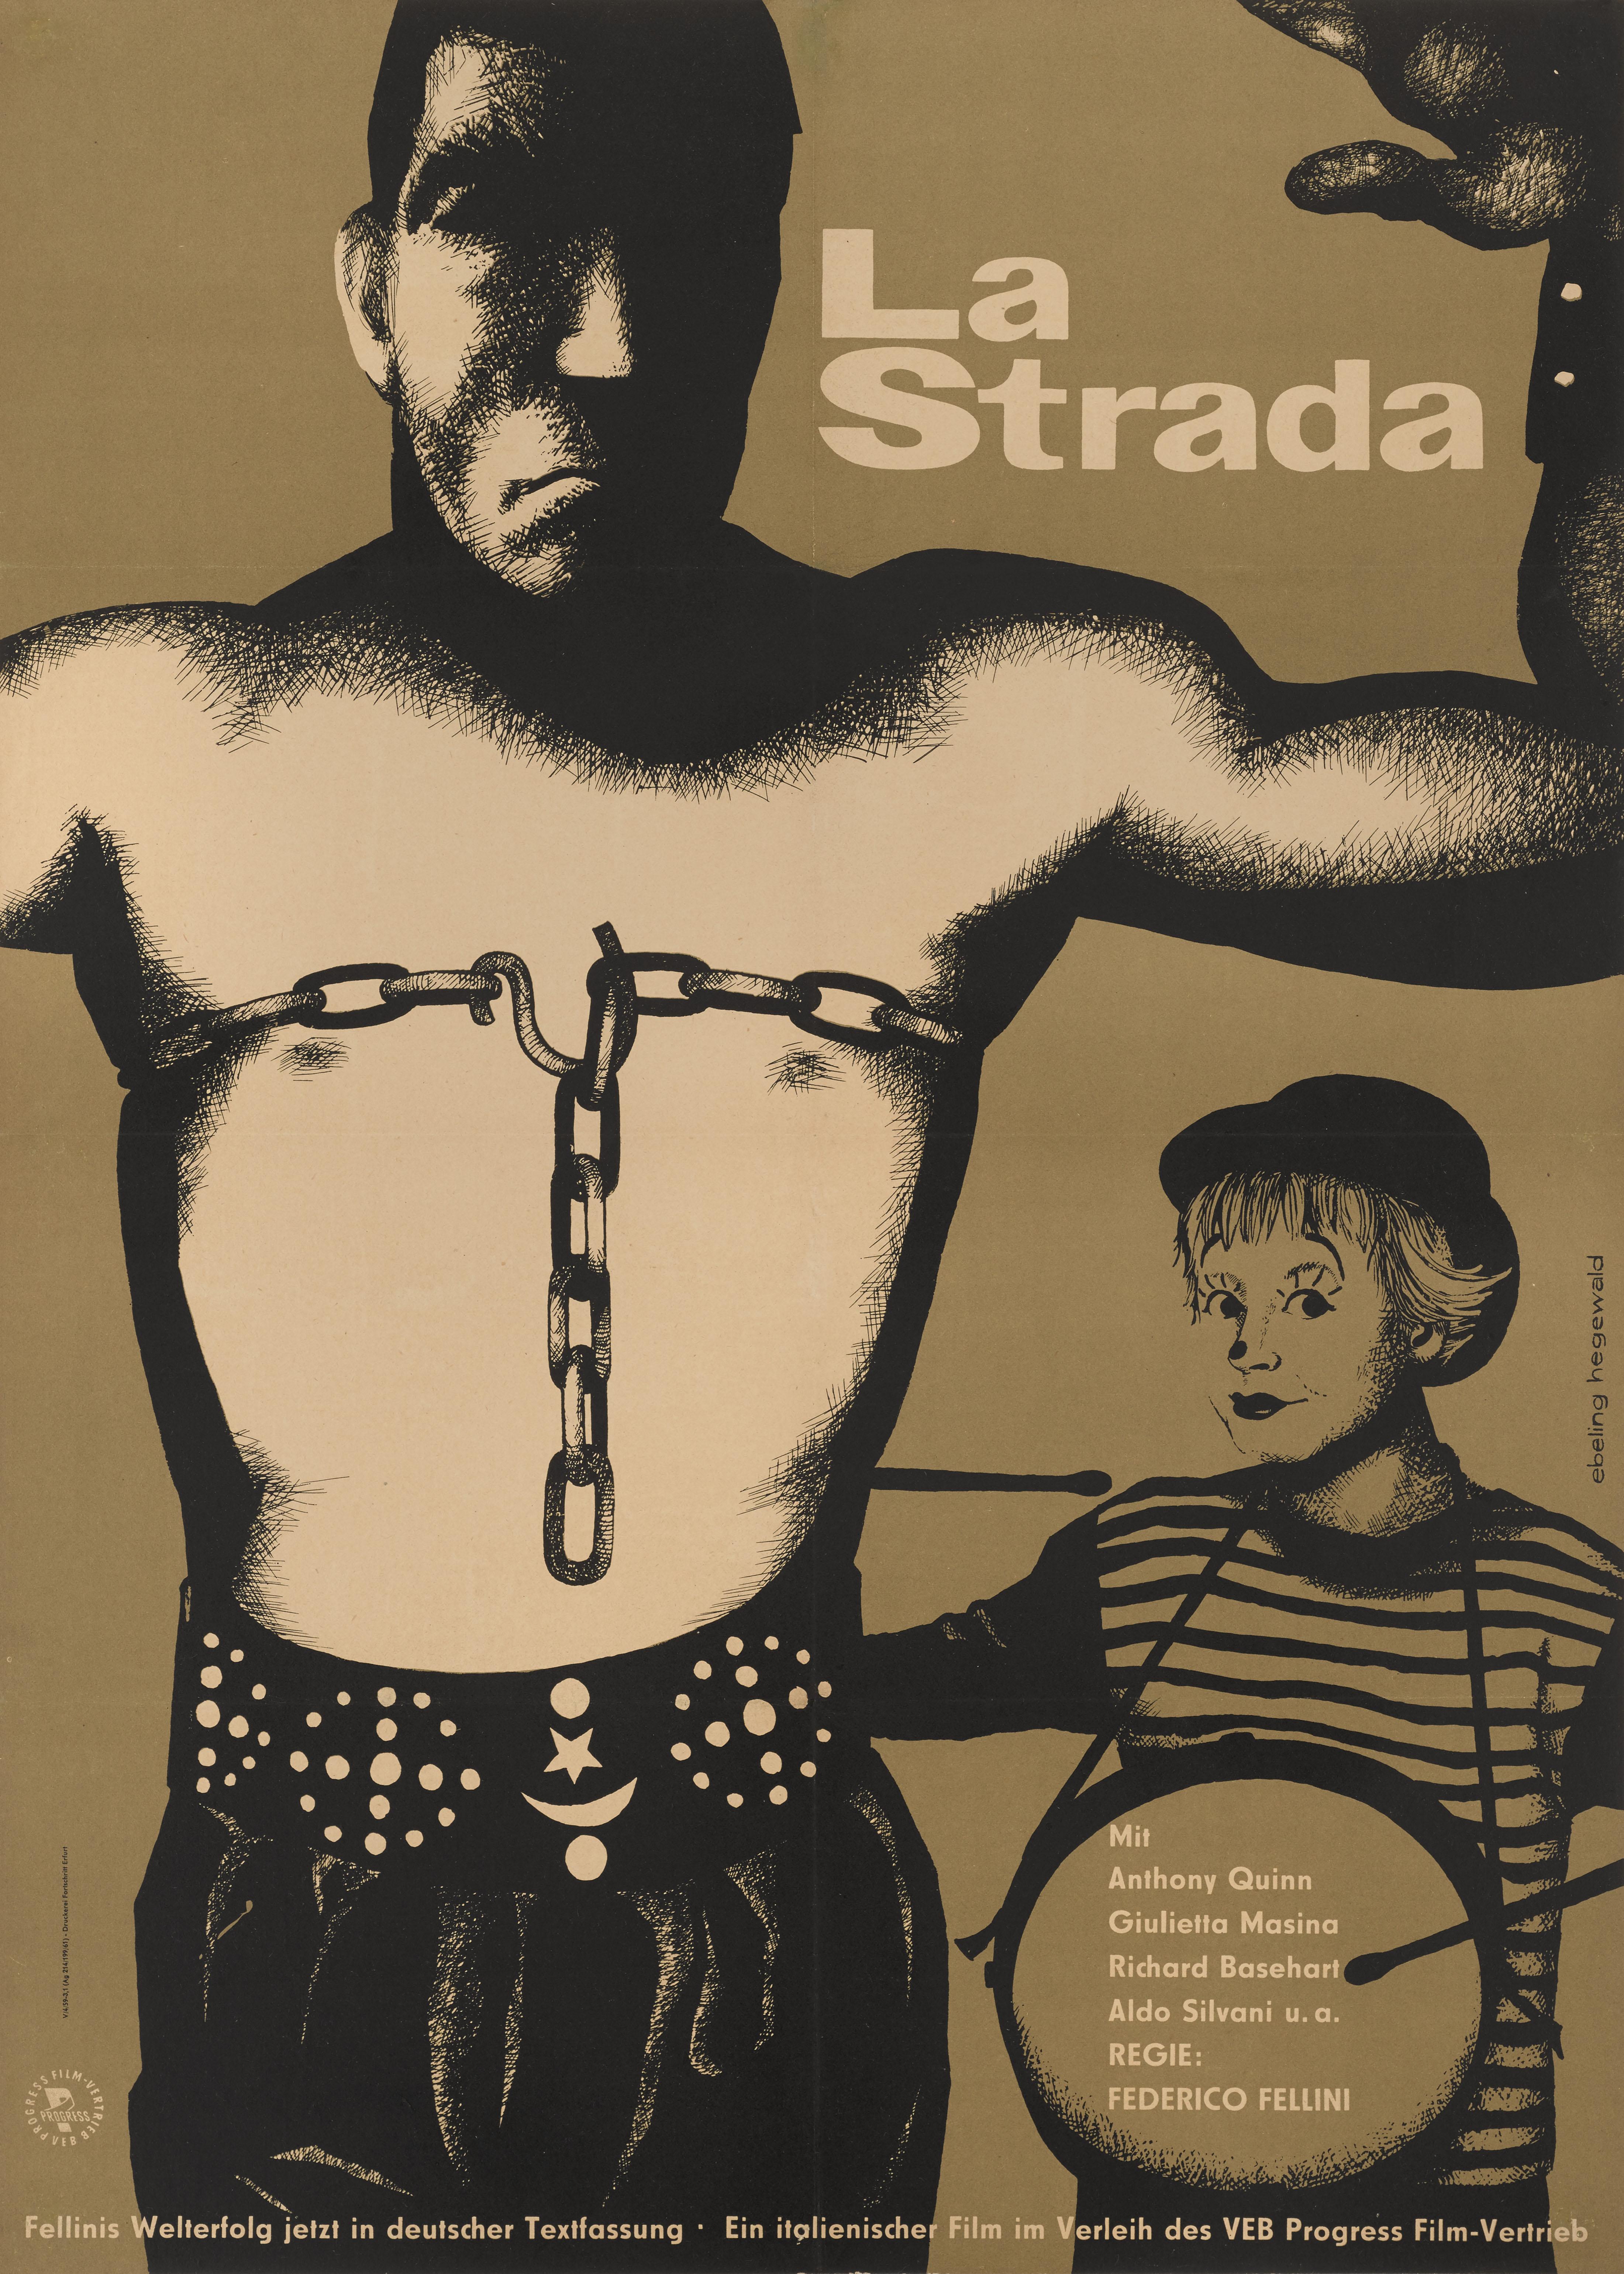 Original East German film poster for the Italian drama La Strada 1954.
This film was directed by Federico Fellini and starred Giuletta Masina, Anthony Quinn and Richard Basehart. This poster was created by Ebeling Hegewald for the films first East